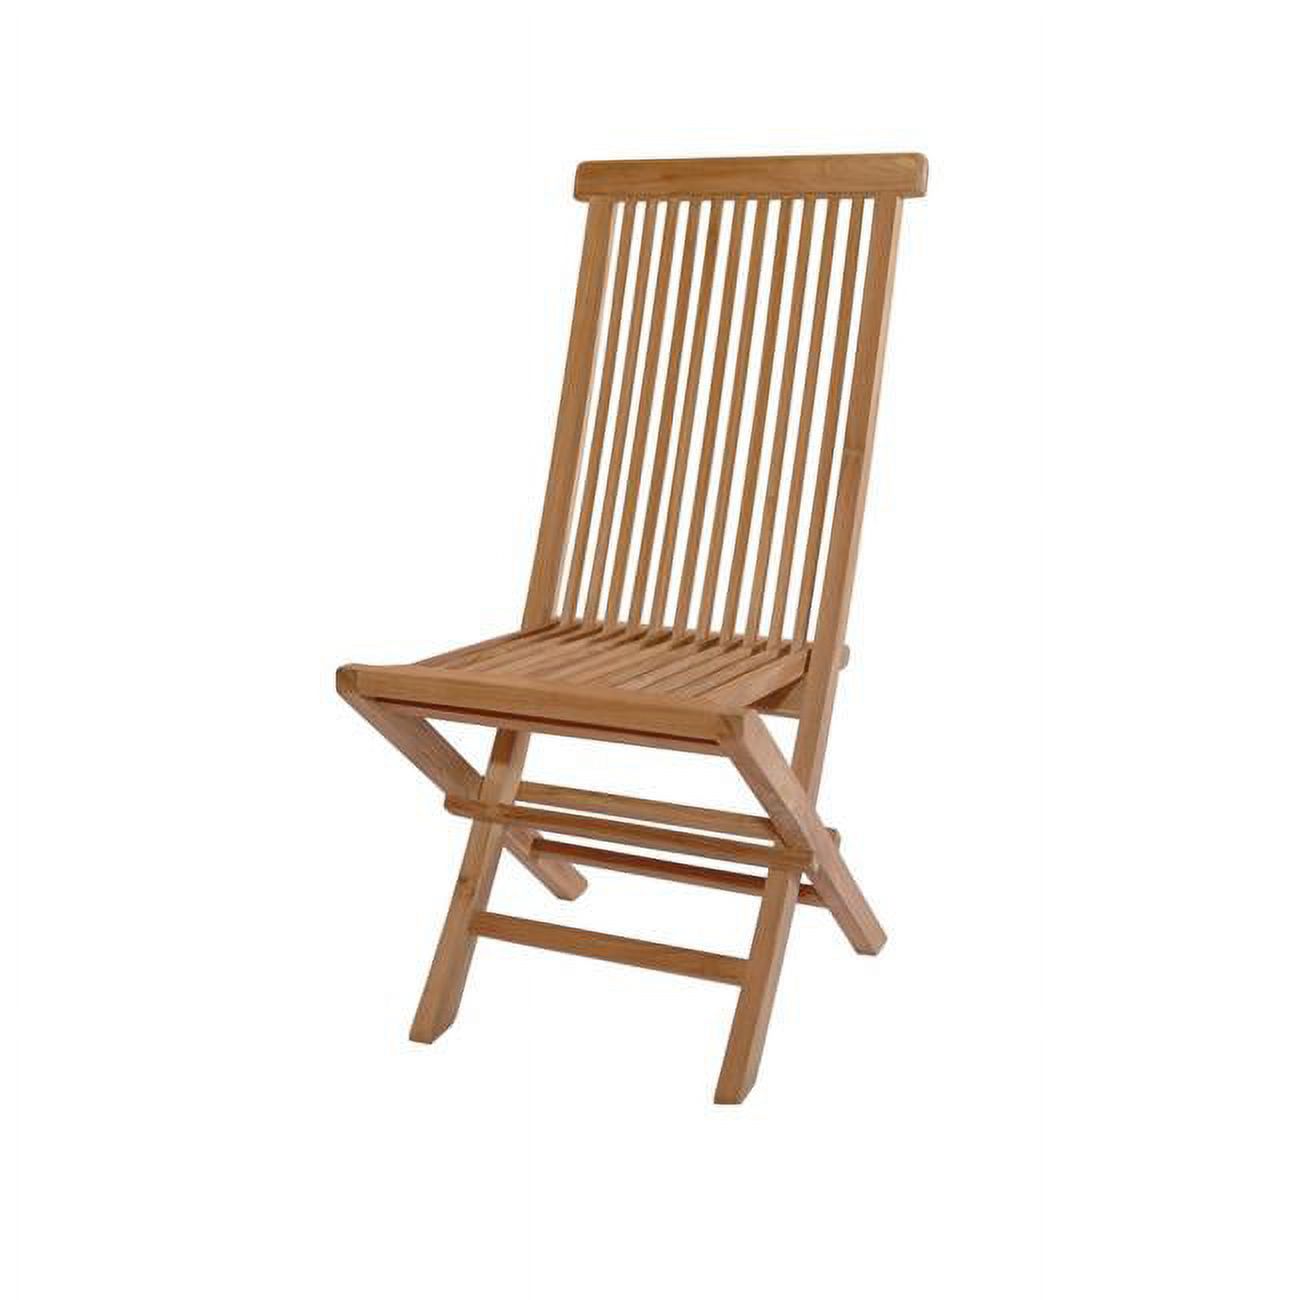 Anderson Teak Classic Folding Chair - image 1 of 5